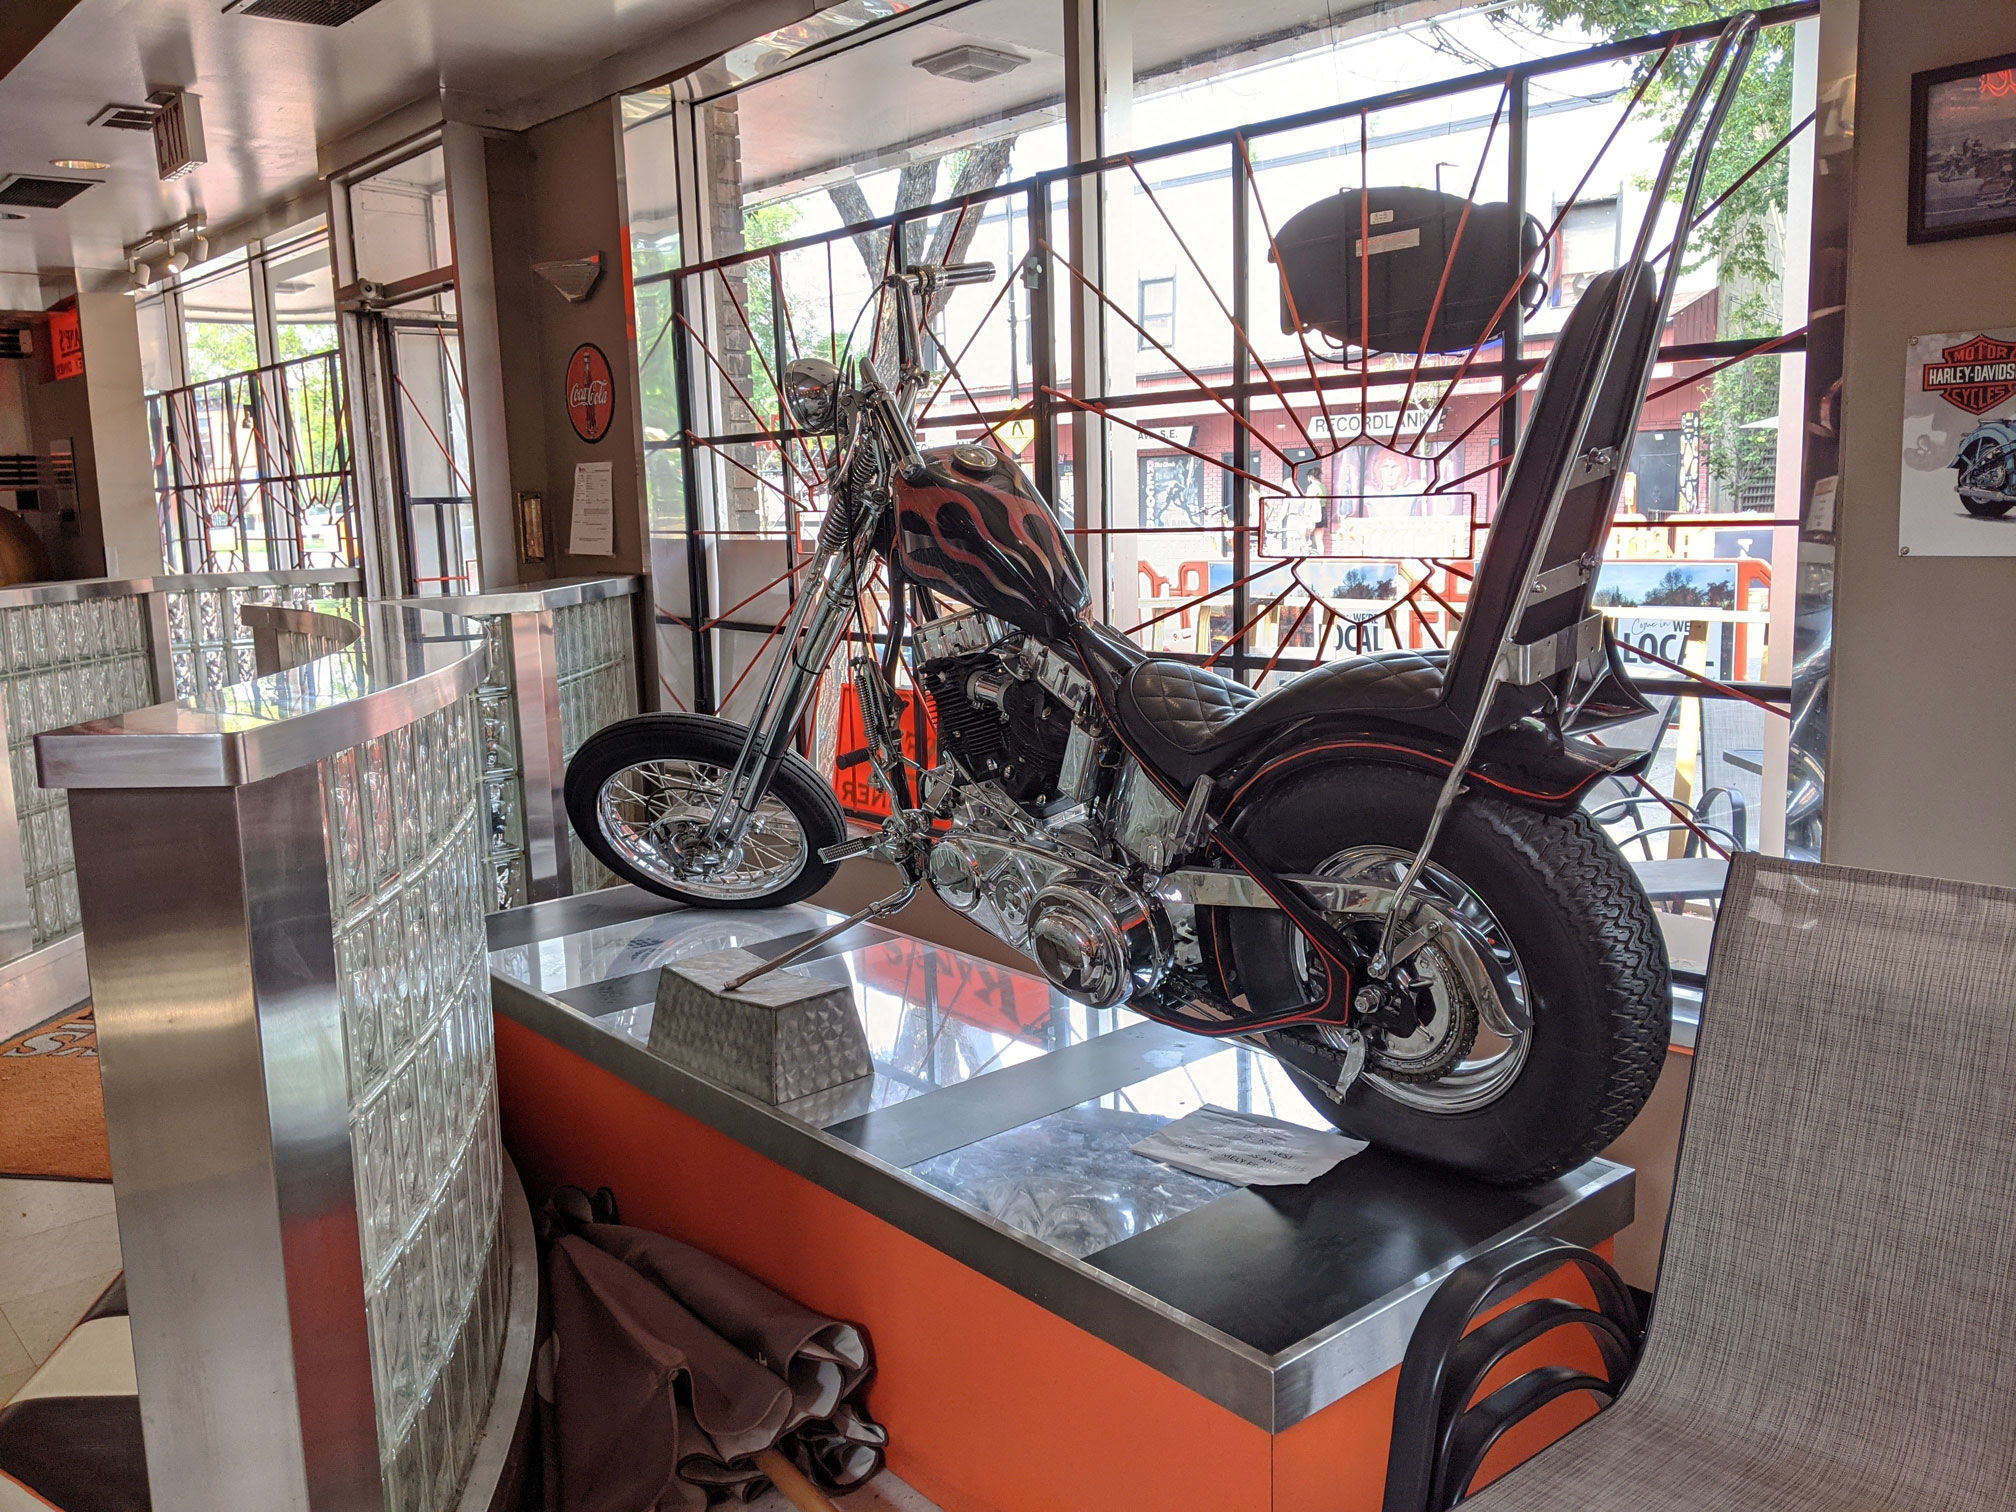 A Harley Davidson motorcycle at one of Calgary's Old-Fashioned Diners